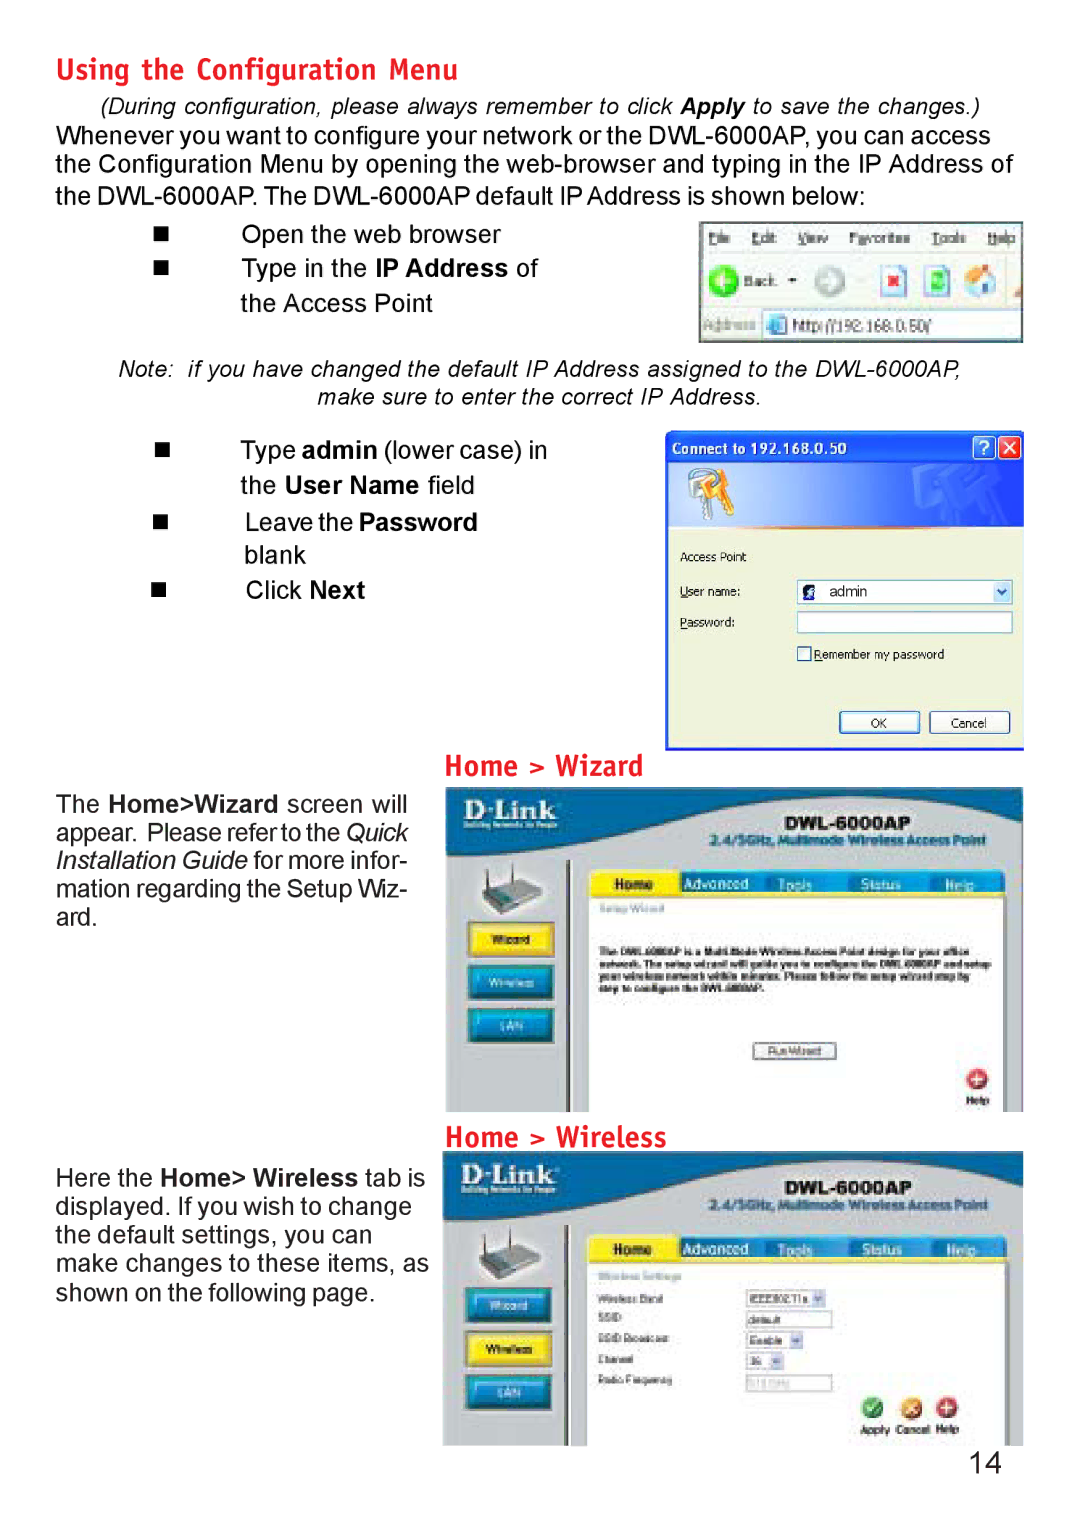 D-Link DWL-6000AP manual Using the Configuration Menu, Home Wizard, Home Wireless 